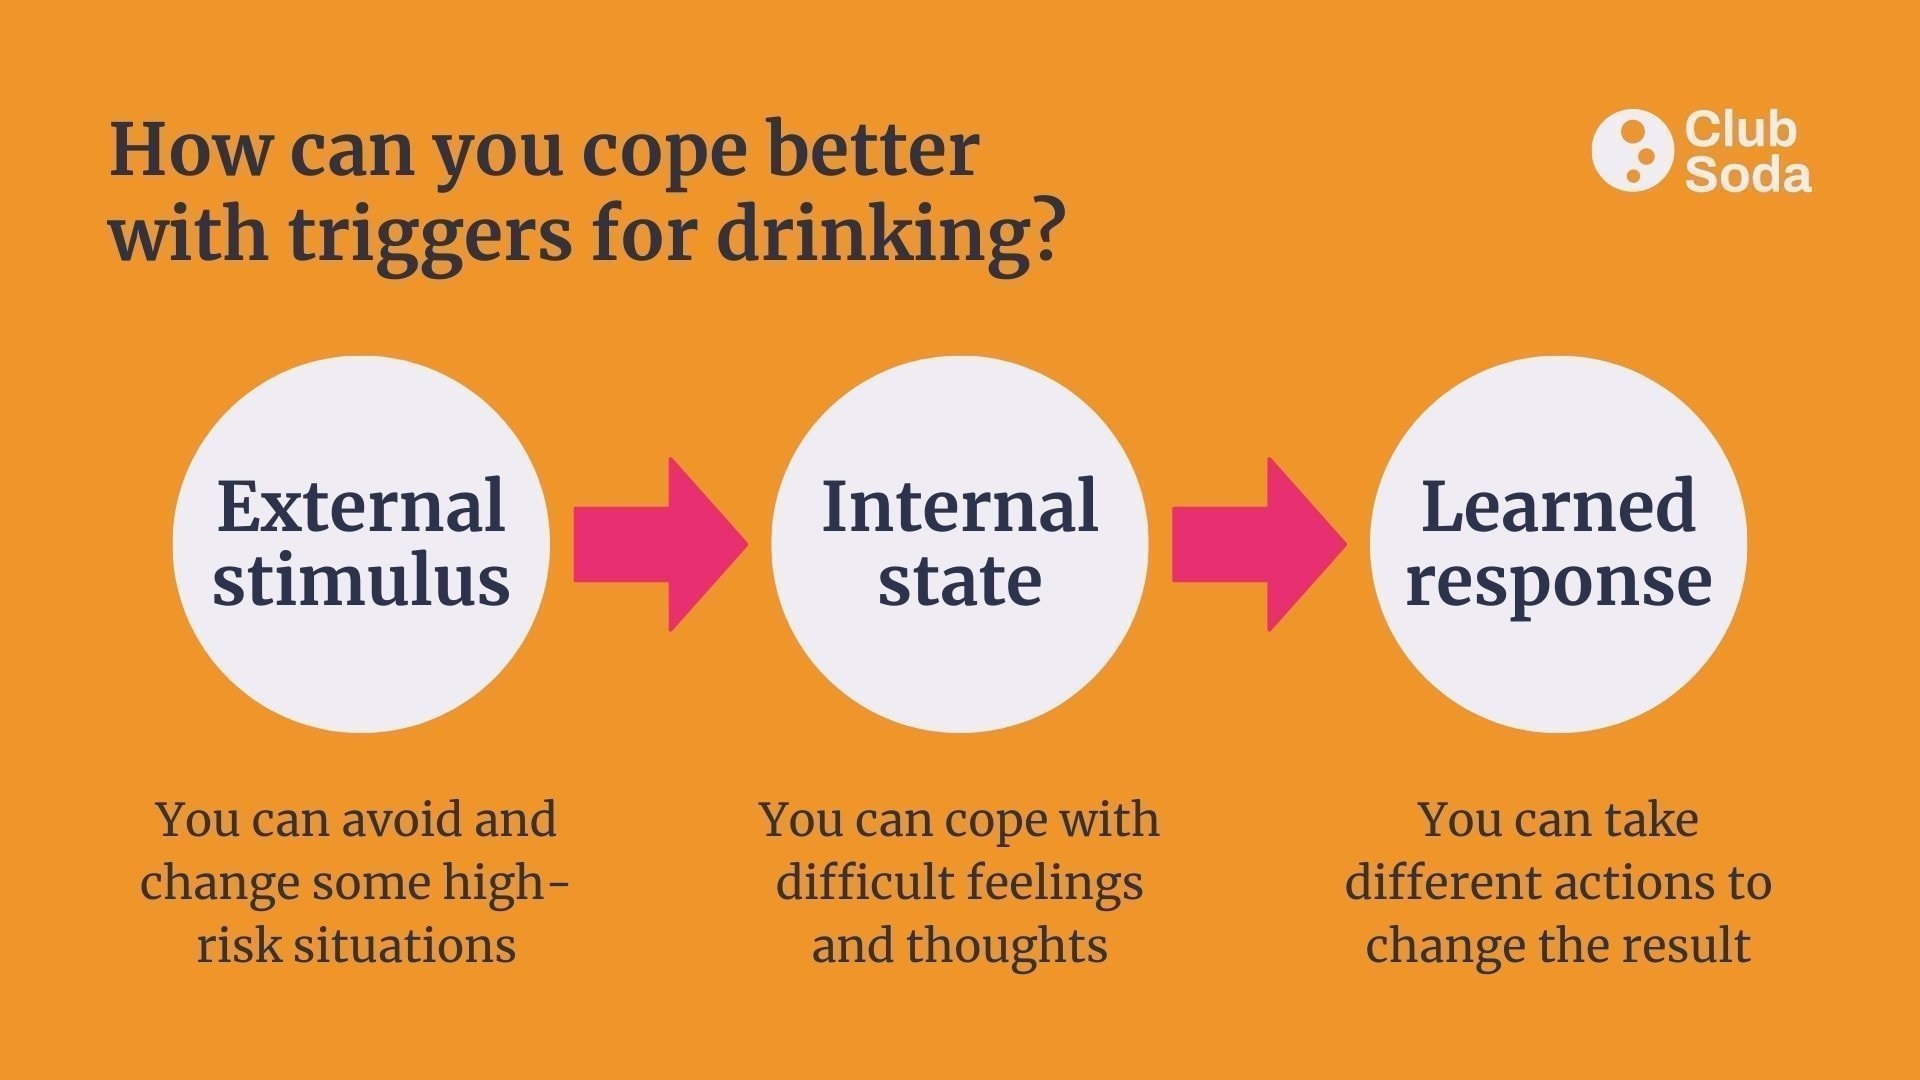 Graphic: How can you cope better with triggers for drinking?

External stimulus: You can avoid and change some high-risk situations.
Internal state: You can cope with difficult thoughts and feelings.
Learned response: You can take different actions to change the result.